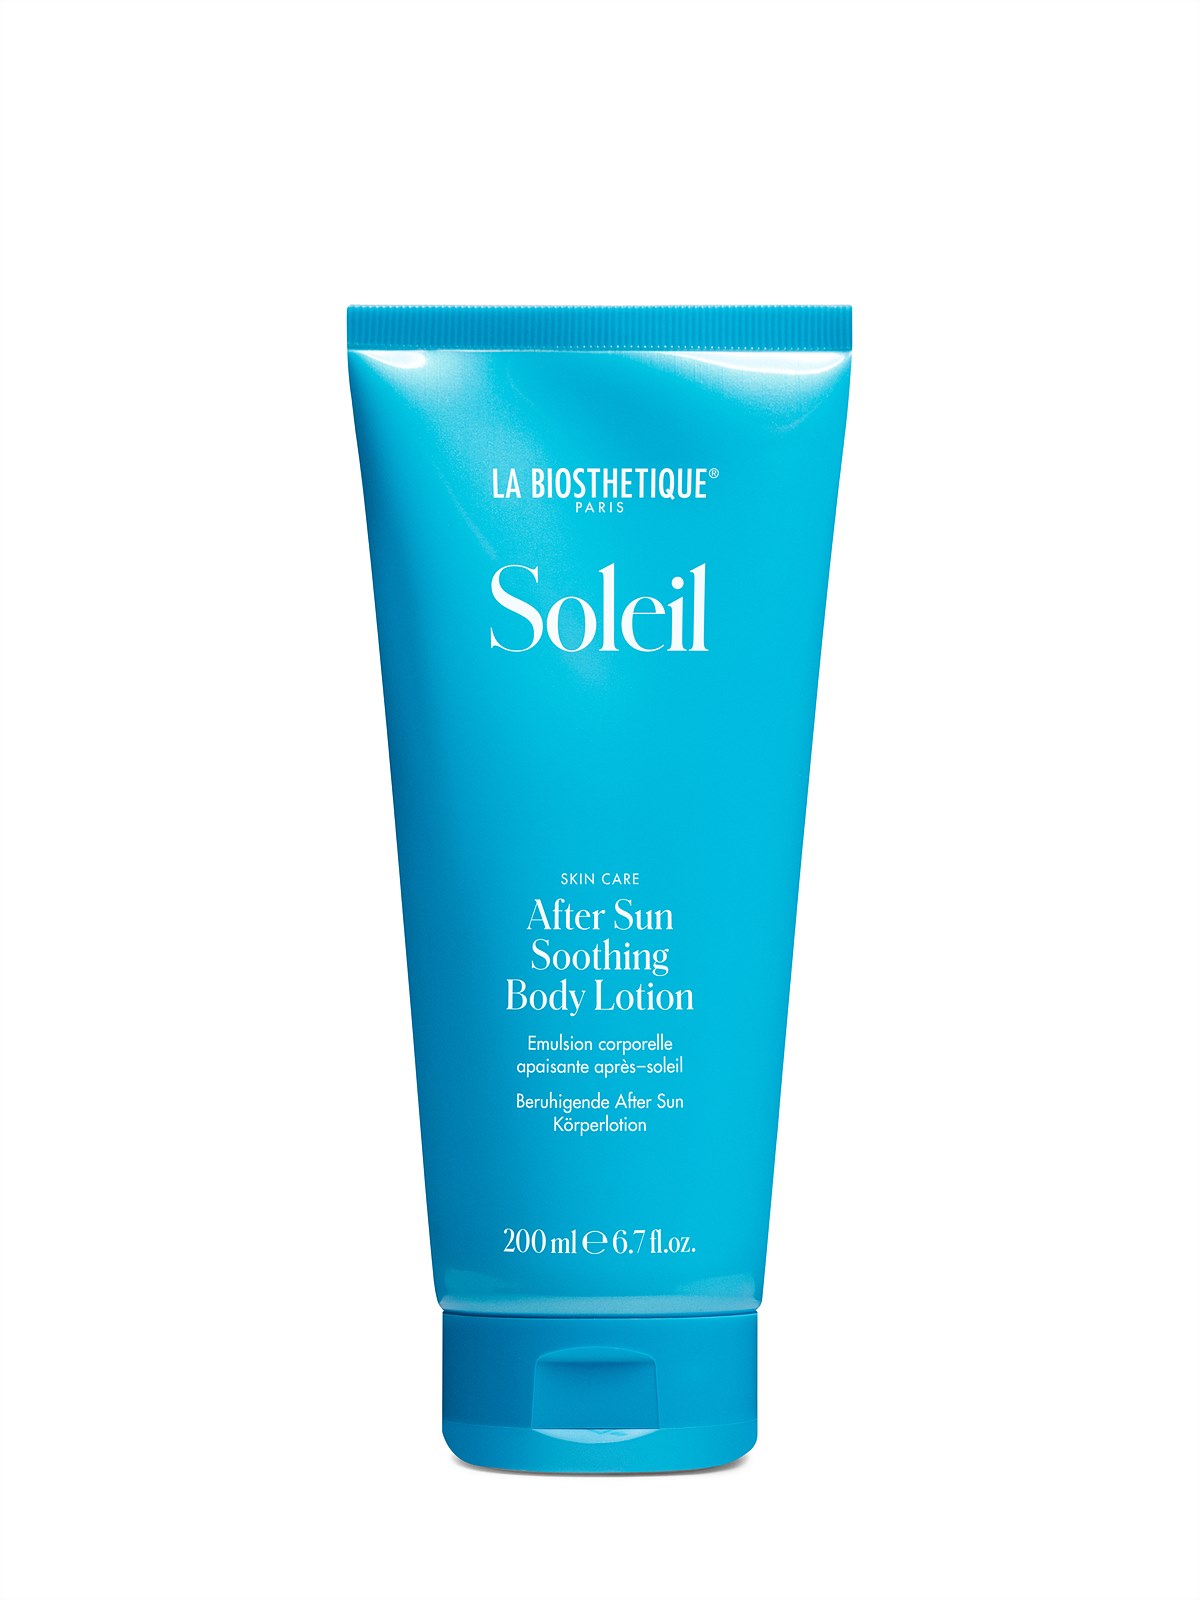 La Biosthétique_Skin-Soleil-After-Sun-Soothing-Body-Lotion-200ml_EUR 29,50